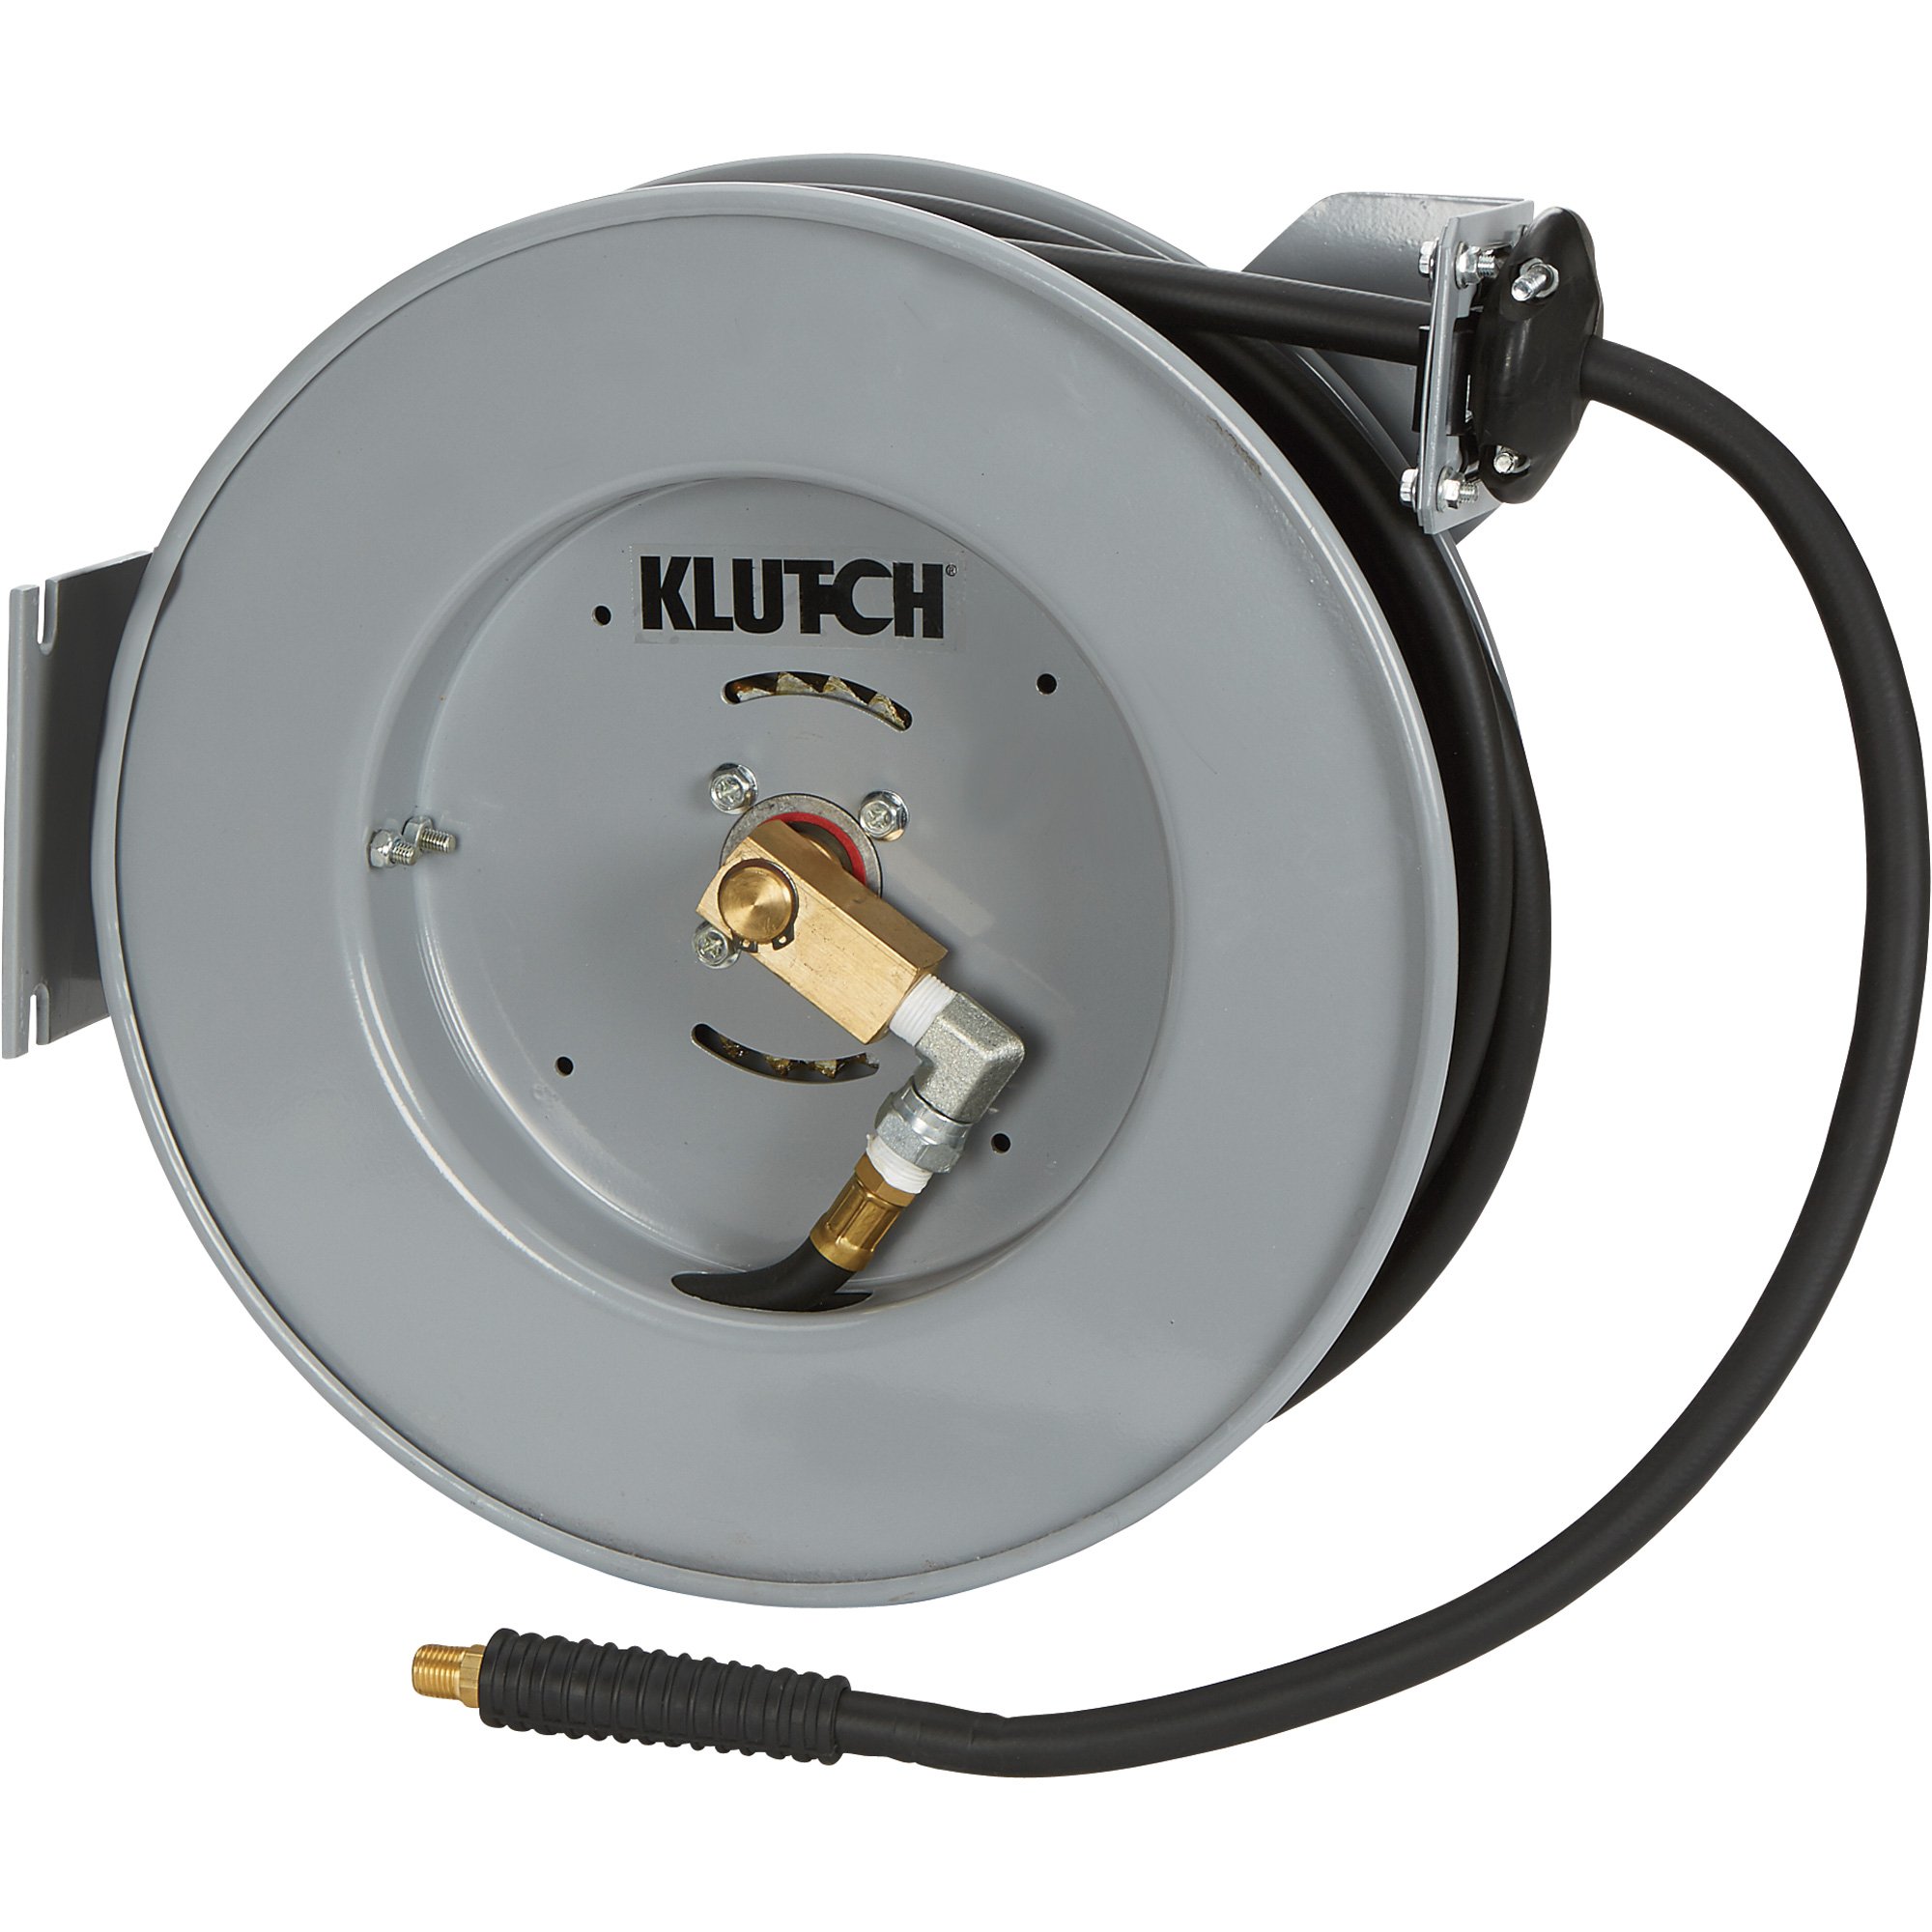 Klutch Compact Auto Rewind Air Hose Reel — With 3/8in. x 50ft. Hybrid Hose,  Max. 300 PSI